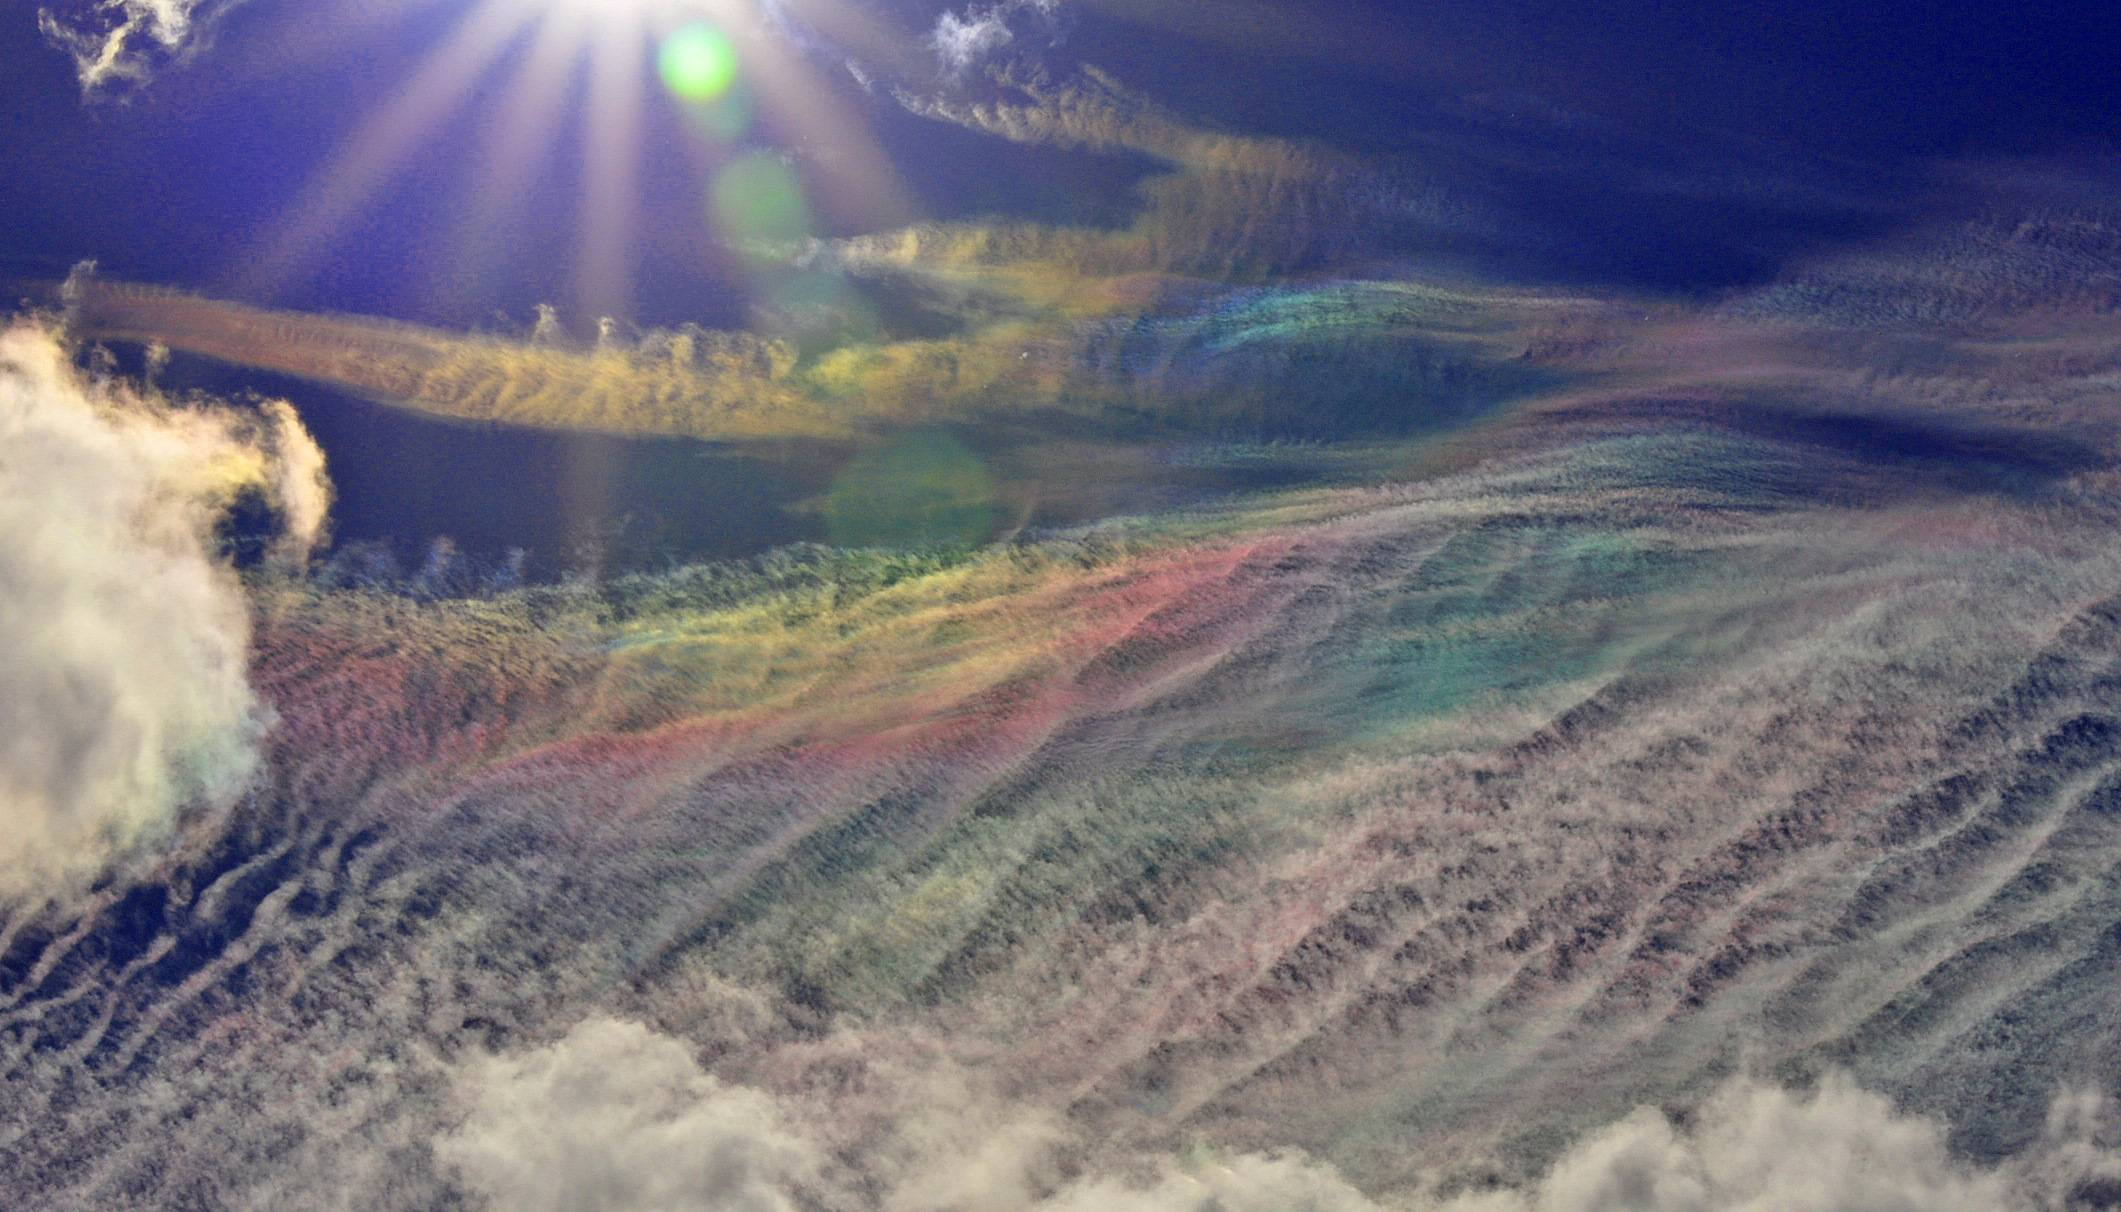 Nacreous clouds over Valle d'Aosta: 288 KB; click on the image to enlarge to 2000x1328 pixels